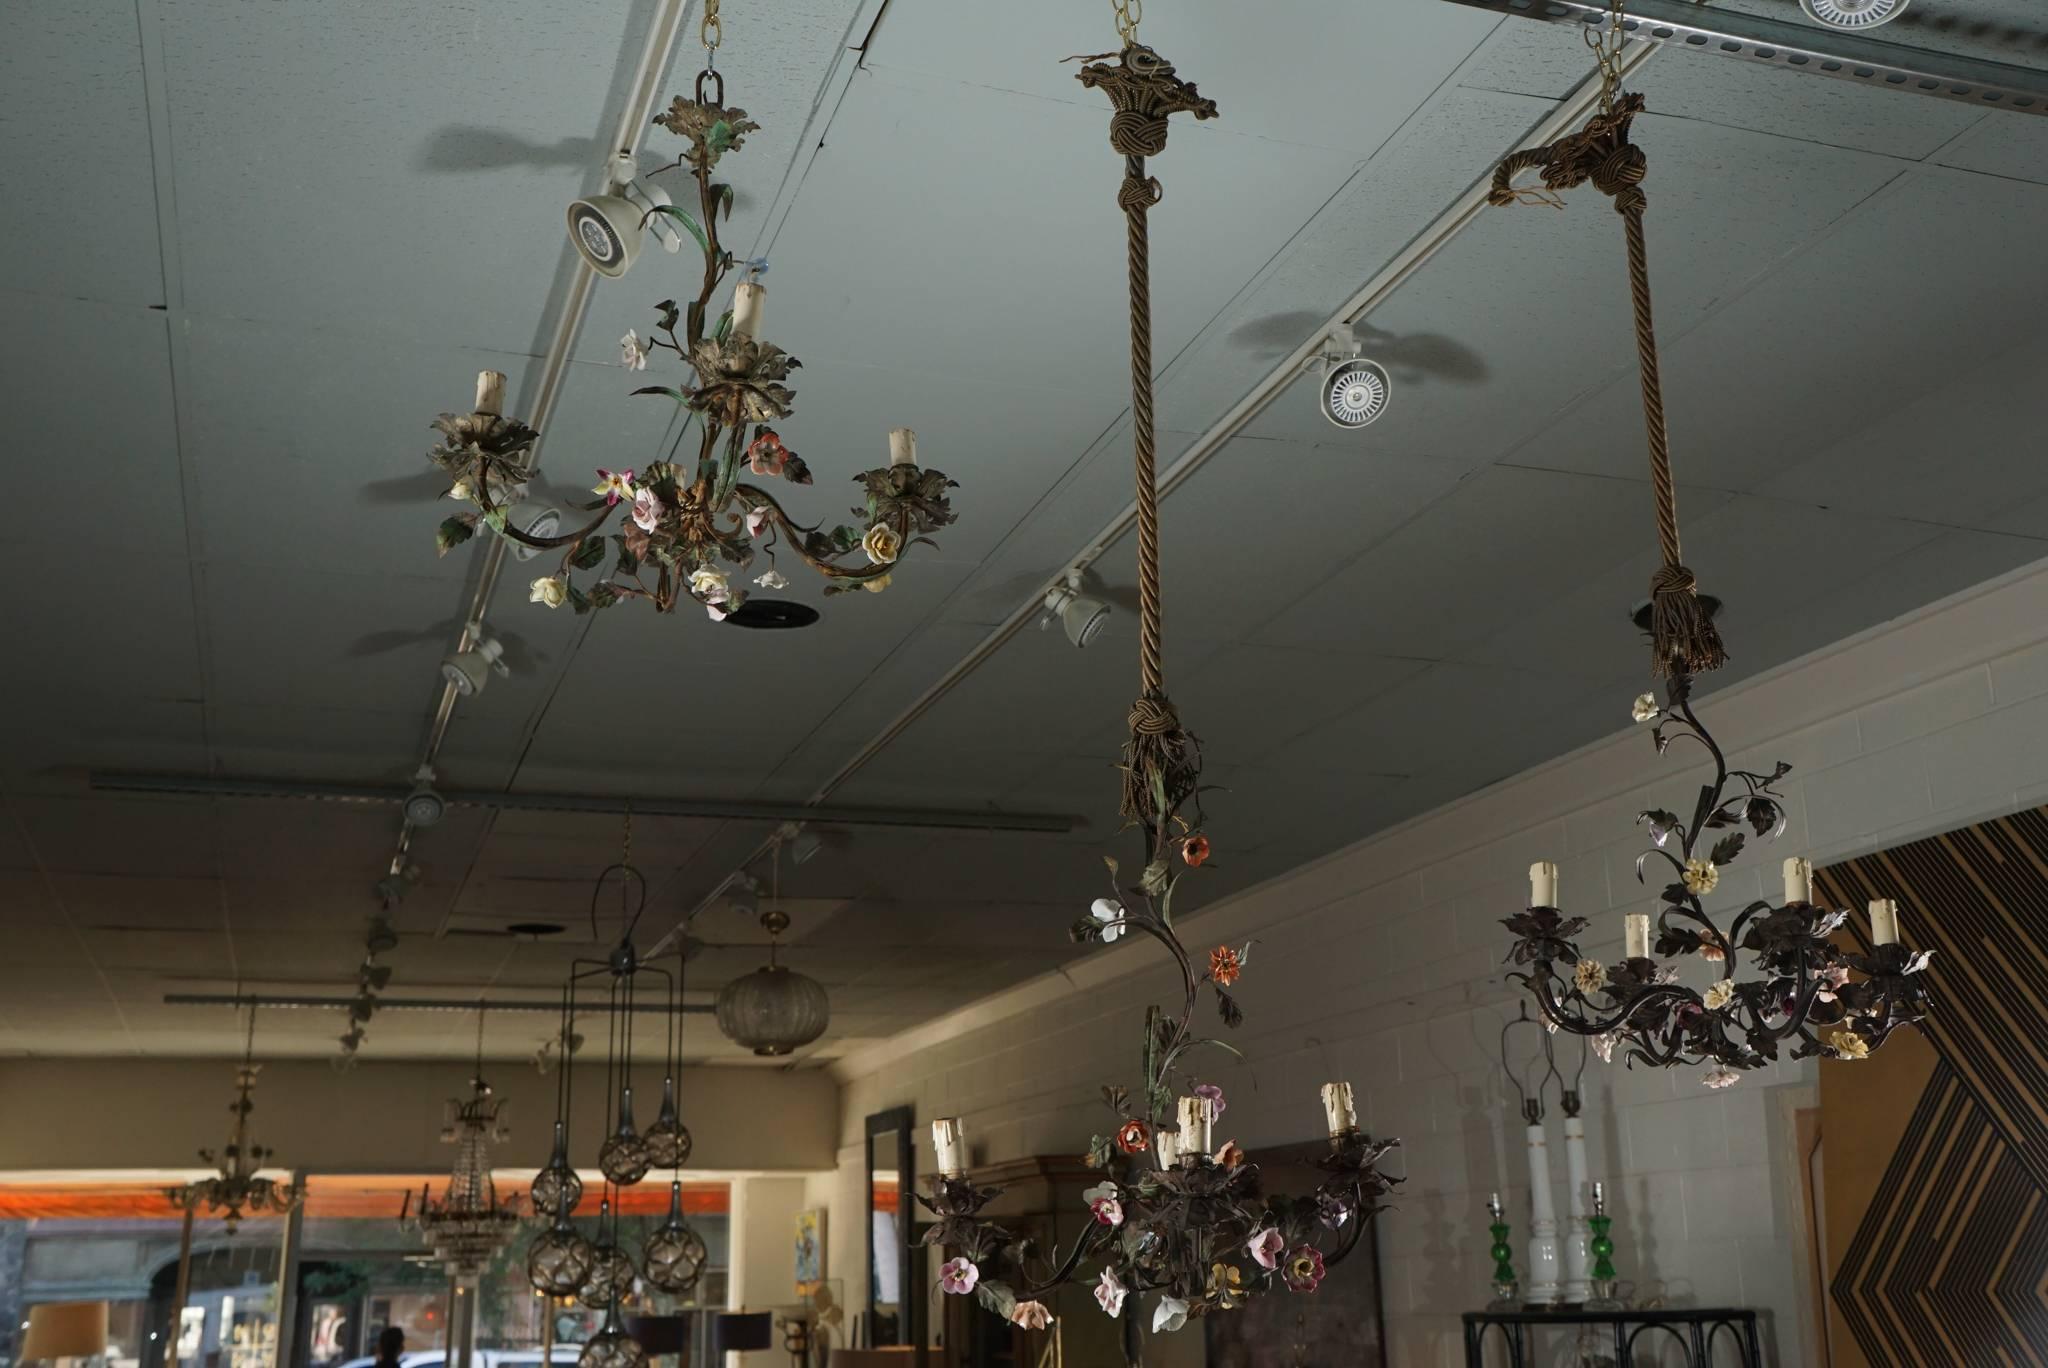 Here is a set of three tole flower bouquet petit chandeliers. The chandeliers look great as a cluster of three. Two of the chandeliers have vintage gold toned cords and tassels. These pieces are available as a group or as singles for $950. Each. The